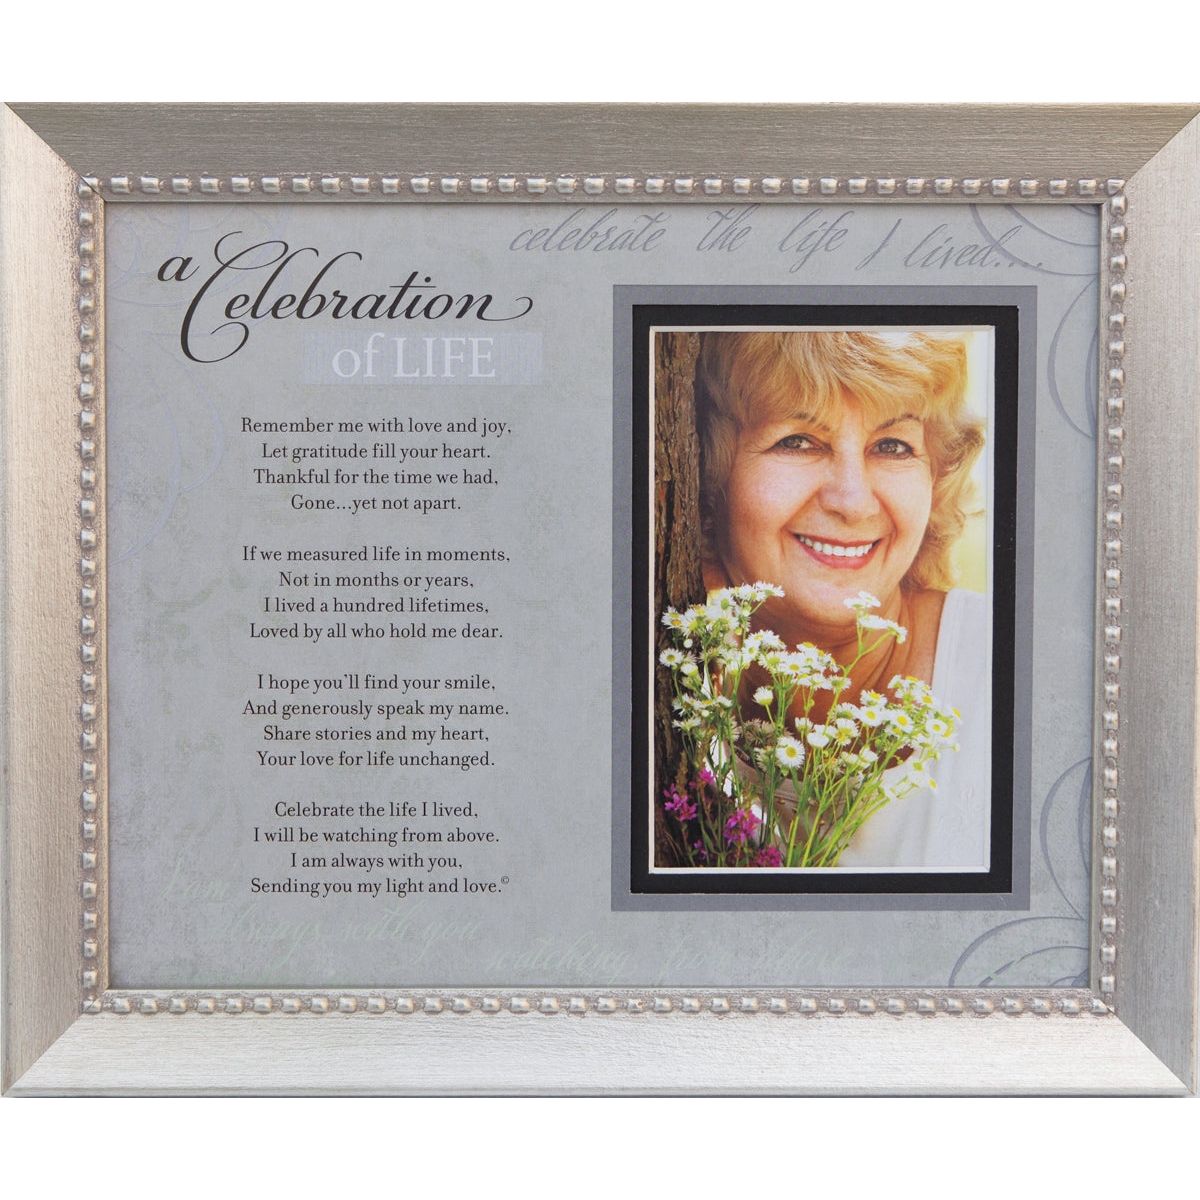 8x10 silver-toned beaded wood frame with "Celebration of Life Memorial" poem and opening for 3.5"x5" or 4"x6" photo.